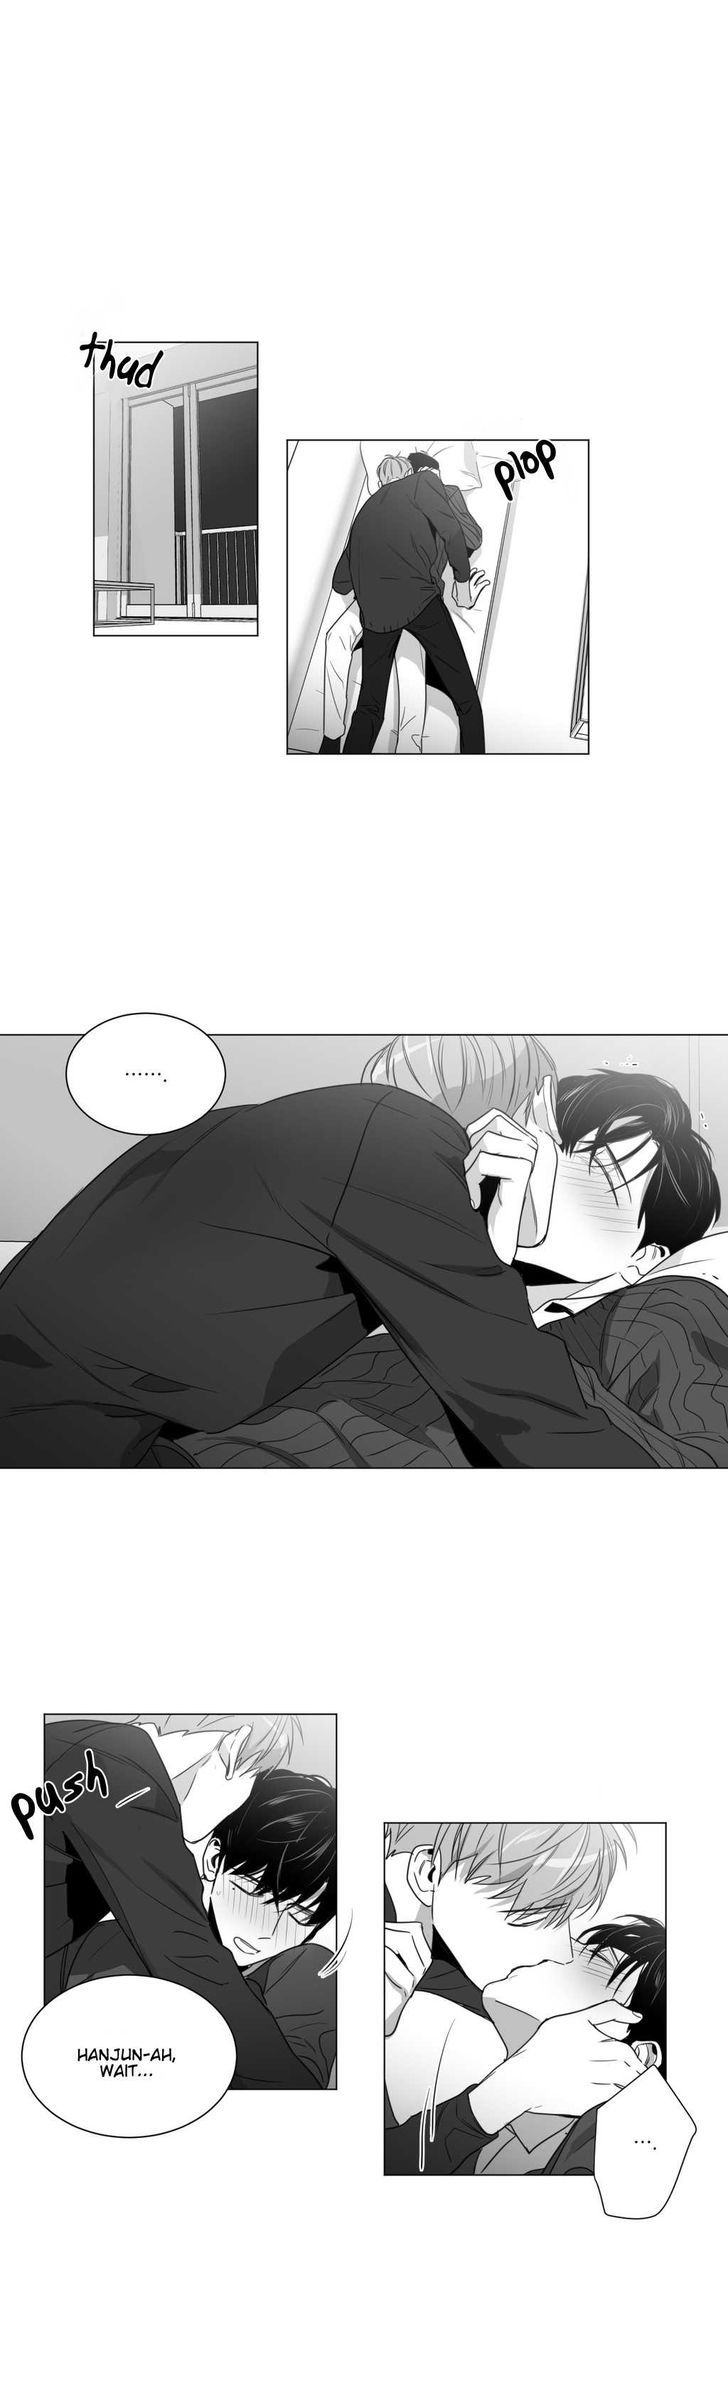 Lover Boy (Lezhin) Chapter 028 page 3